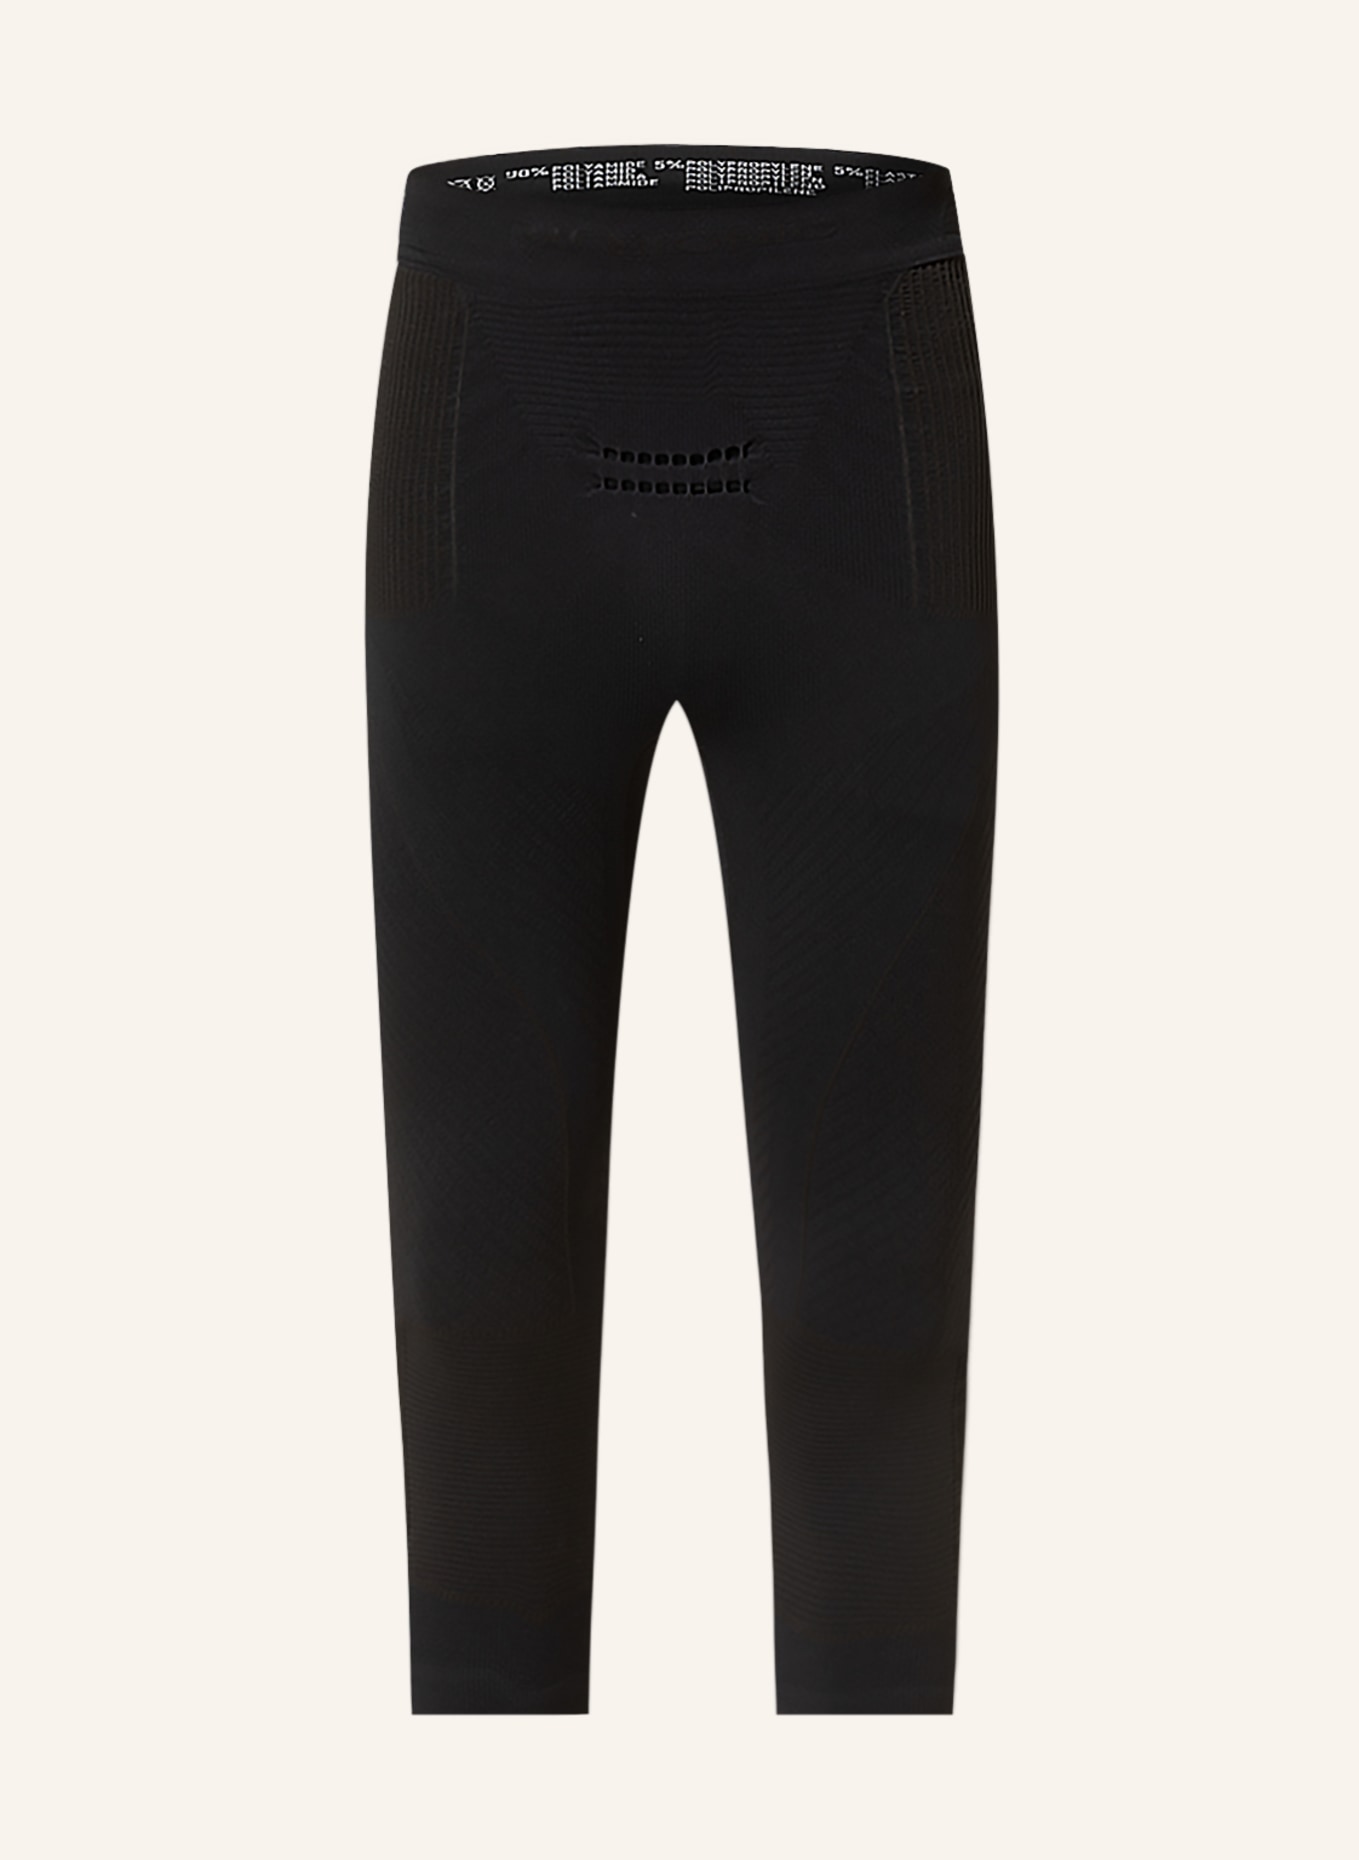 X-BIONIC Functional baselayer trousers ENERGY ACCUMULATOR® 4.0 with cropped leg length, Color: BLACK (Image 1)